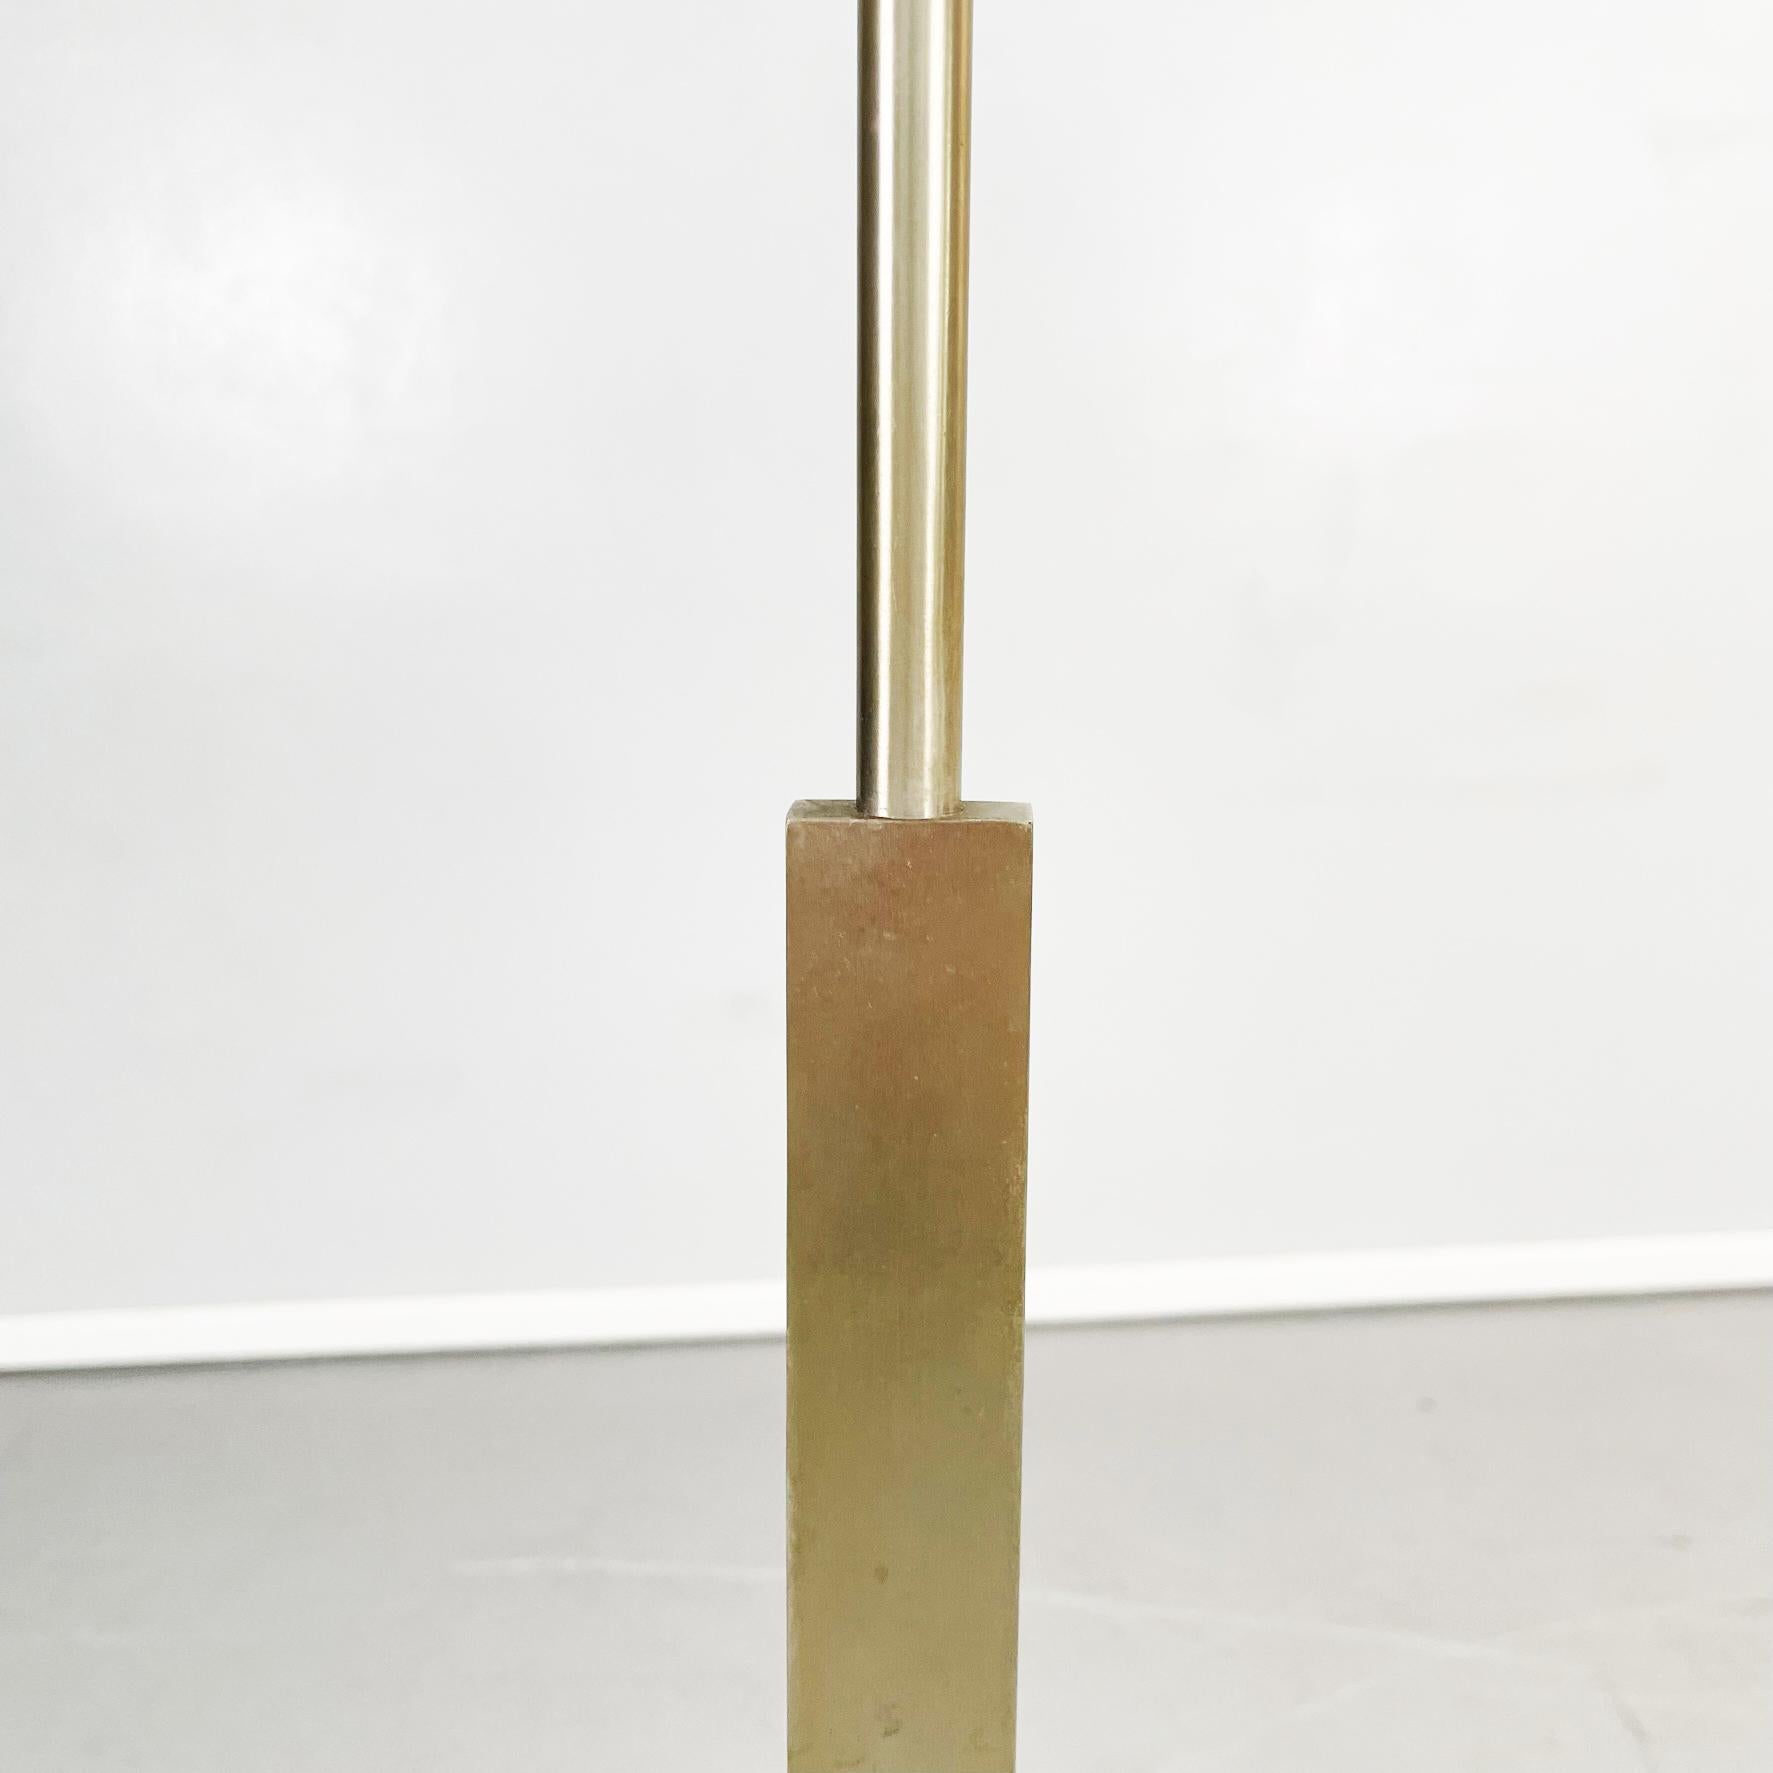 Italian Mid-Century Floor Lamp in Fabric, Leather and Brass by Stilnovo, 1970s For Sale 7